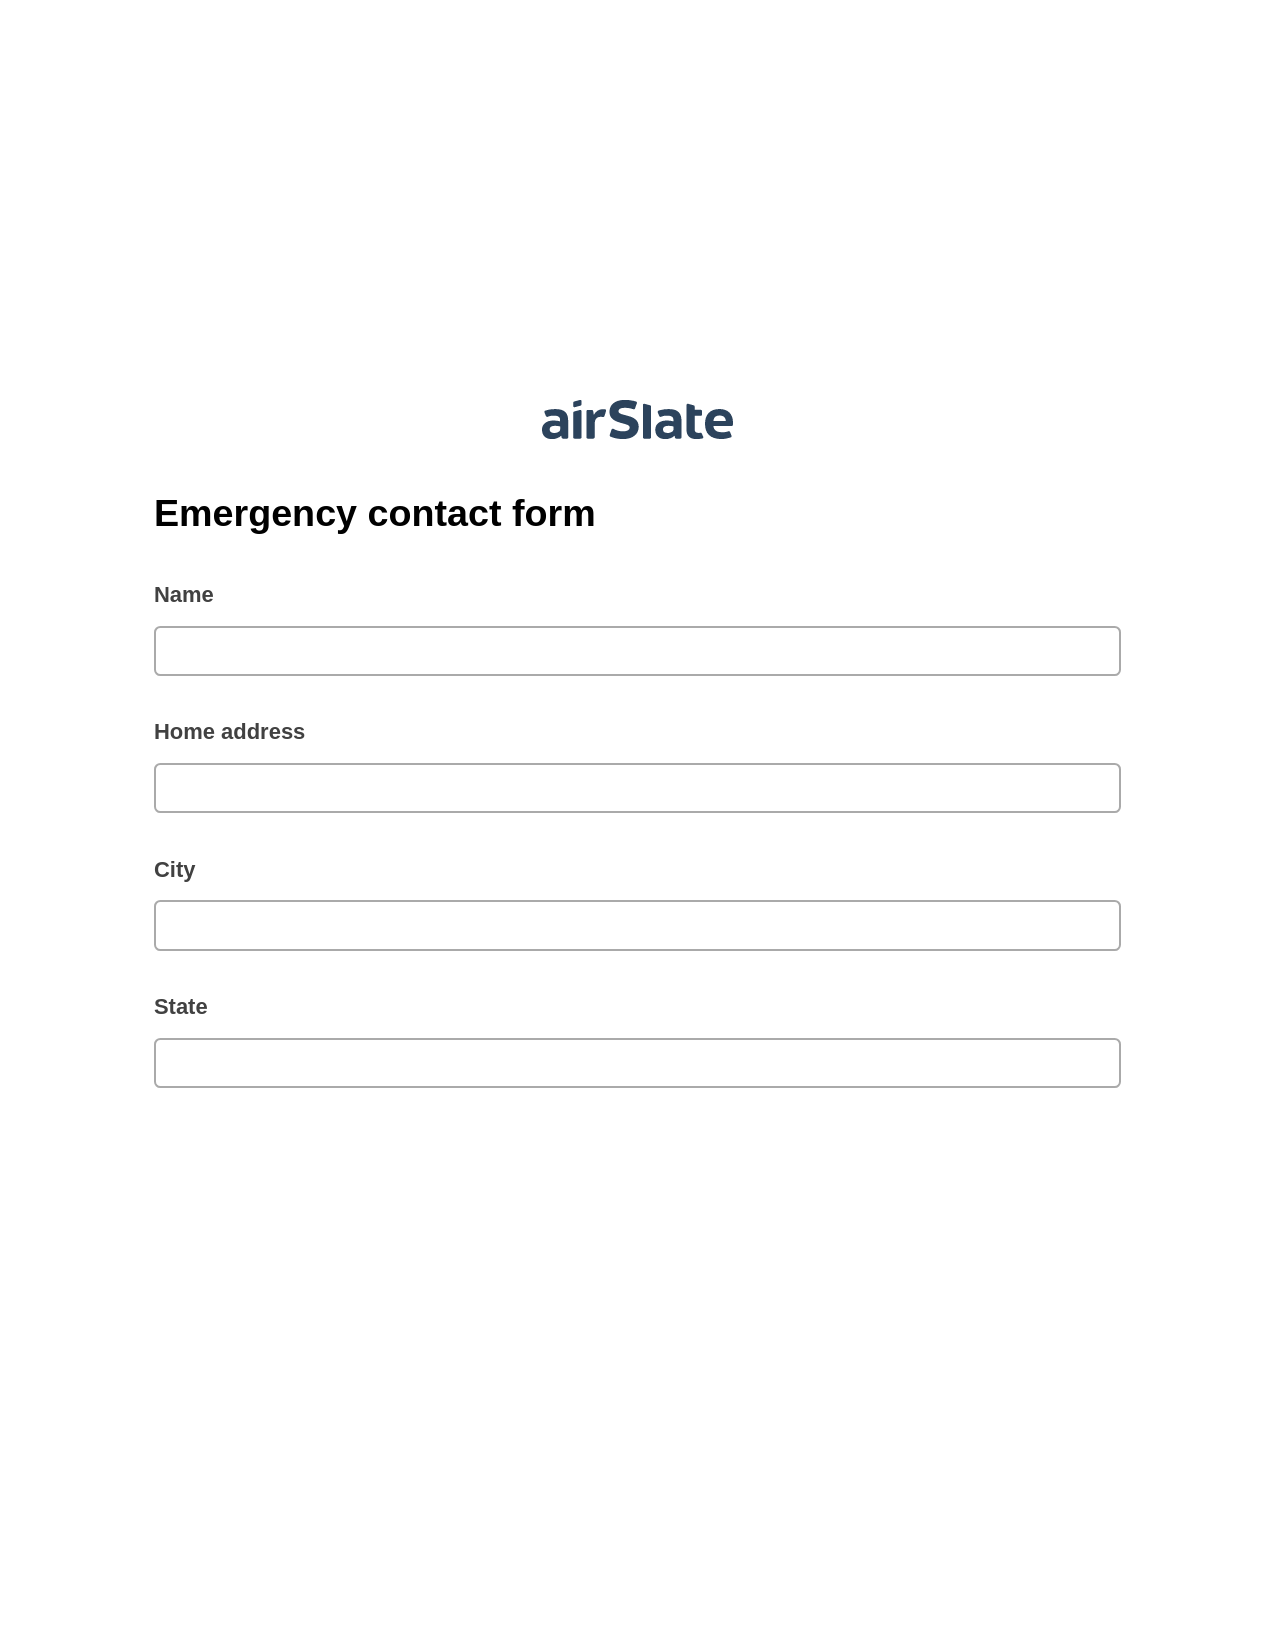 Emergency contact form Pre-fill from NetSuite Records Bot, Webhook Bot, Export to Excel 365 Bot